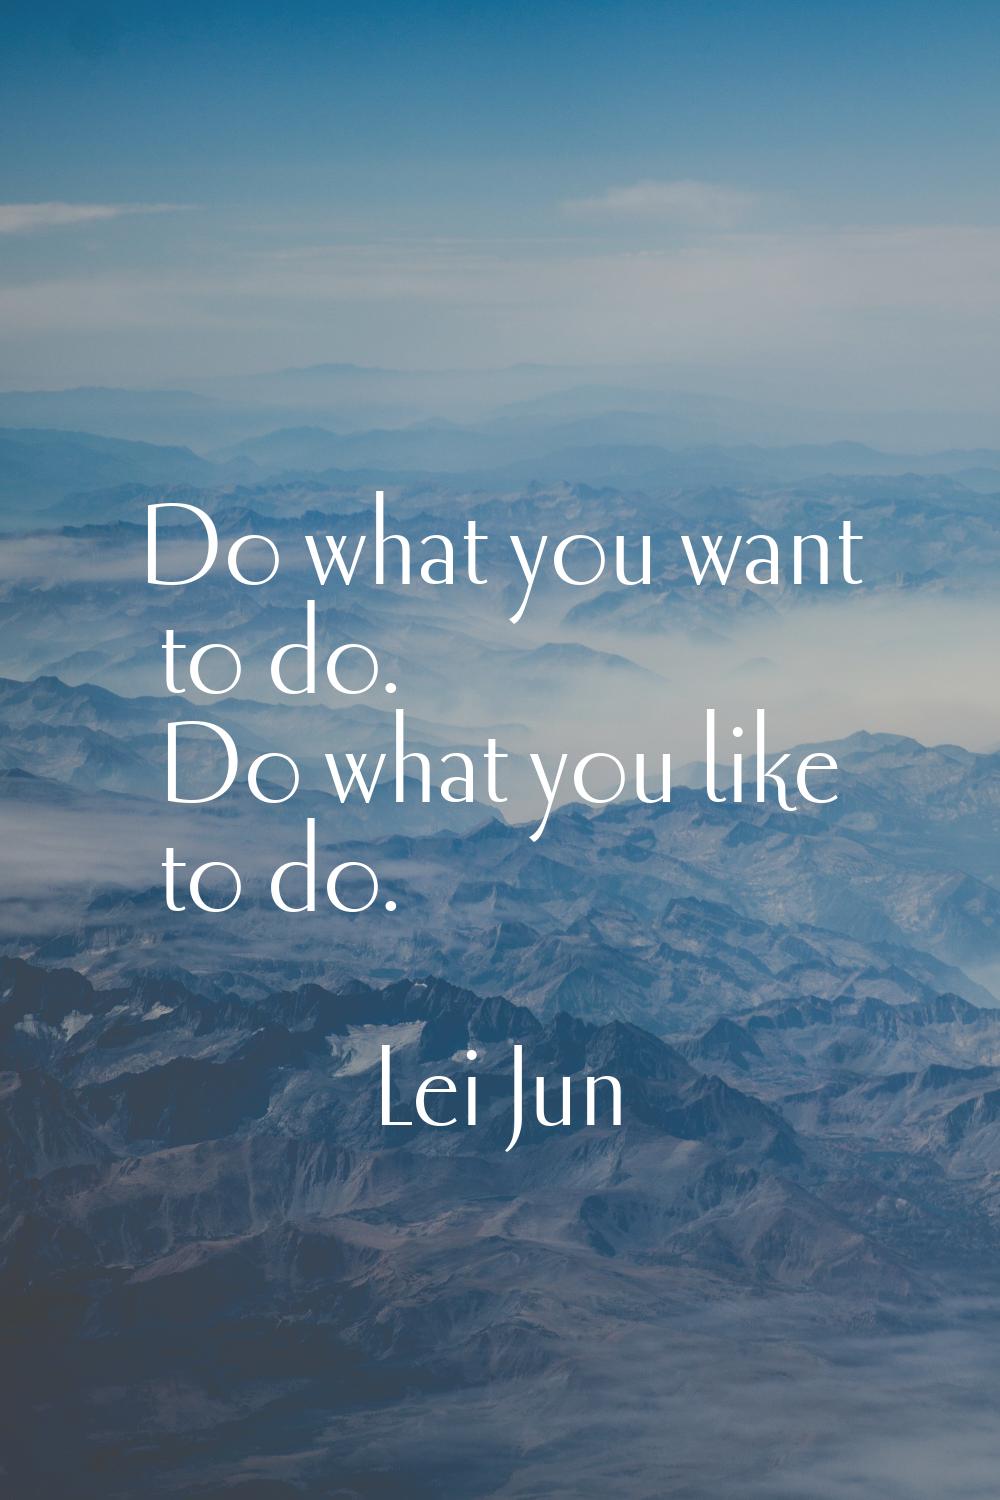 Do what you want to do. Do what you like to do.